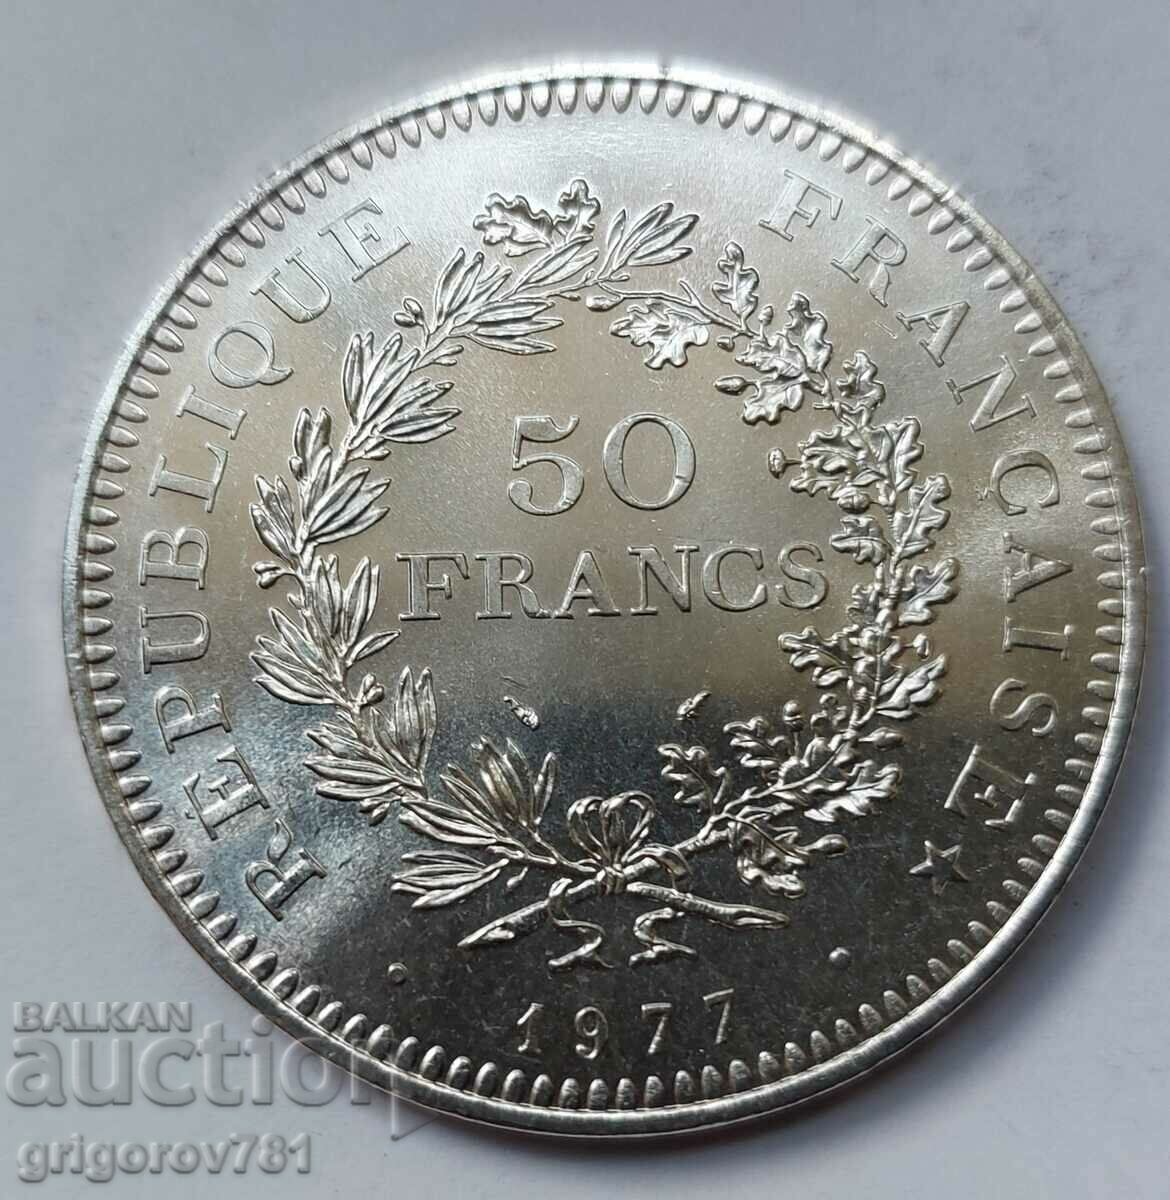 50 Francs Silver France 1977 - Silver Coin #45